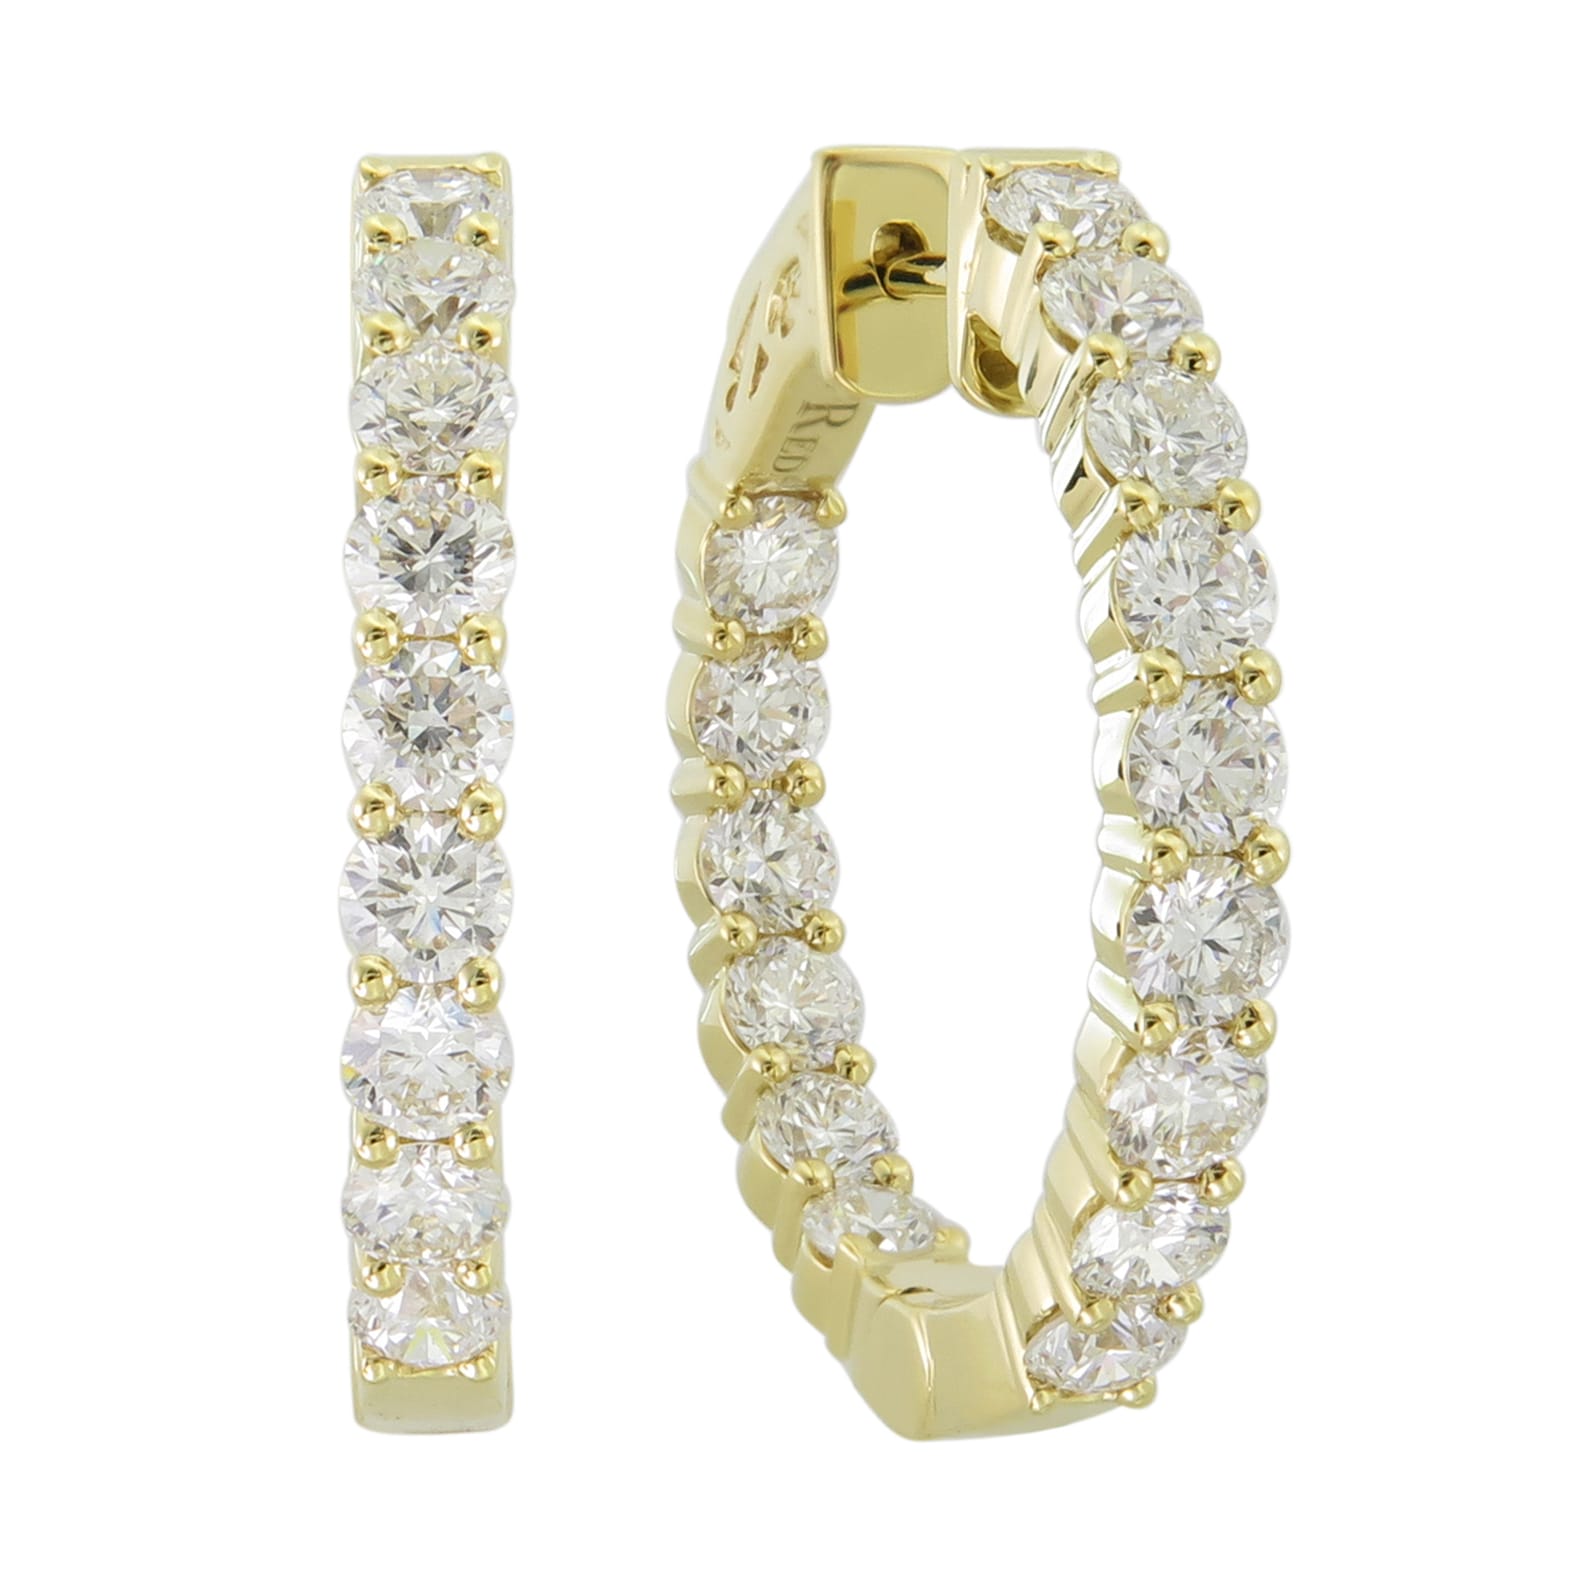 Yellow Gold Hoop Earrings With 30 Brilliant-Cut Diamonds